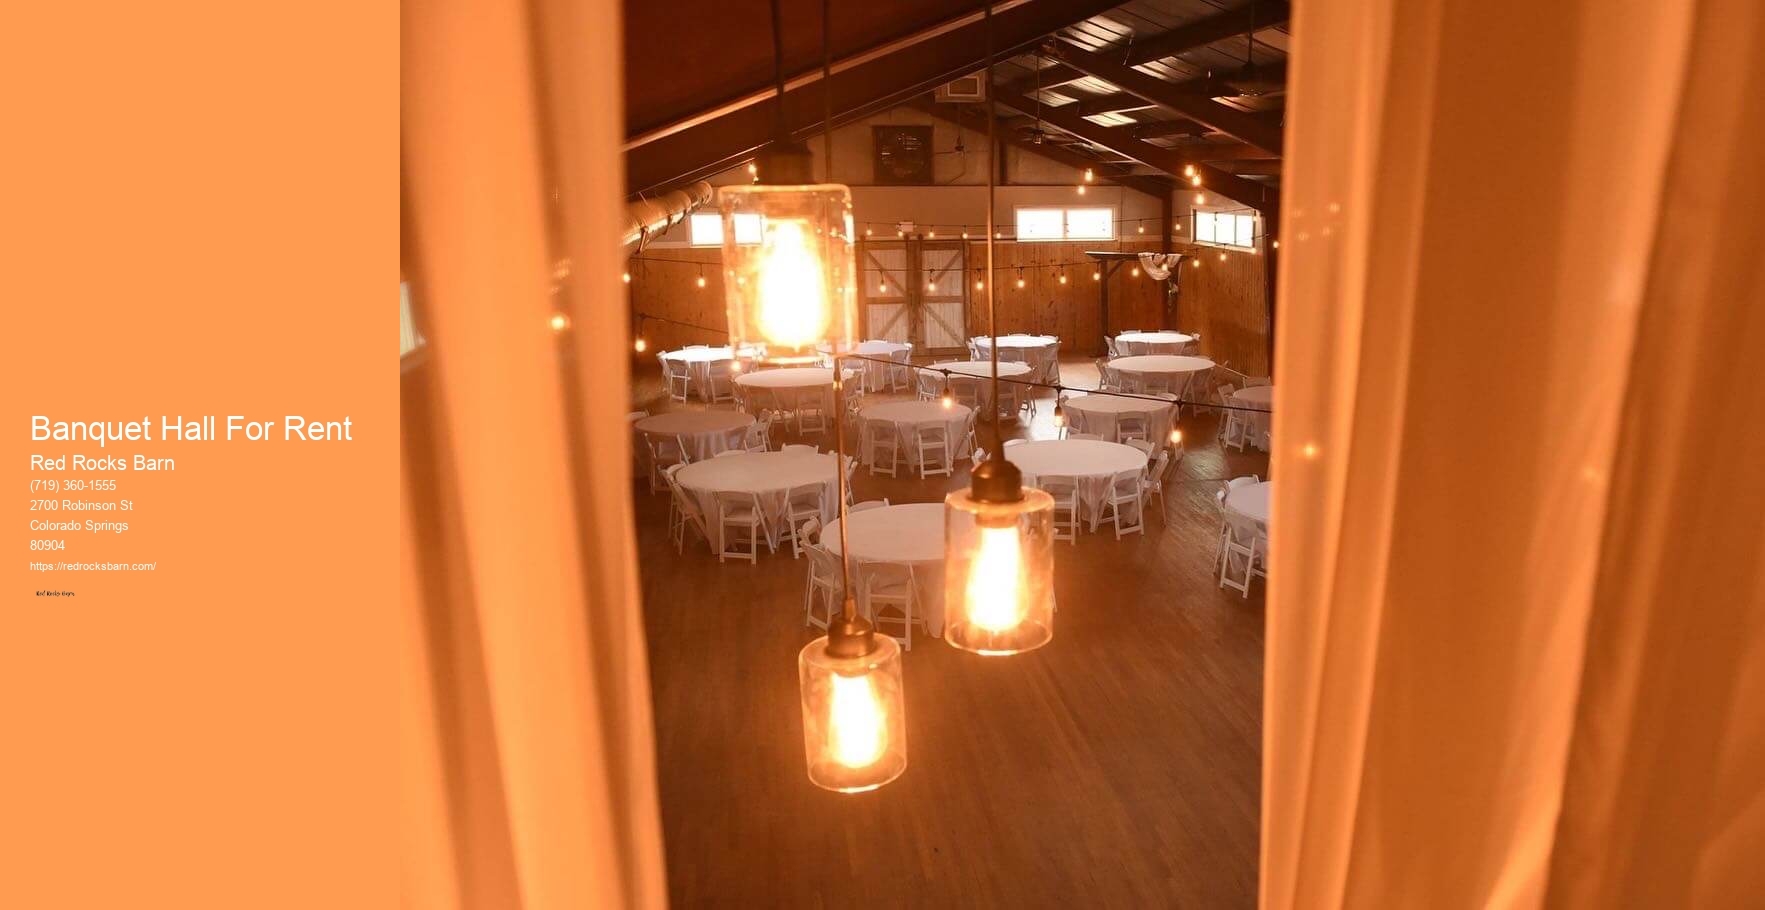 Banquet Hall For Rent